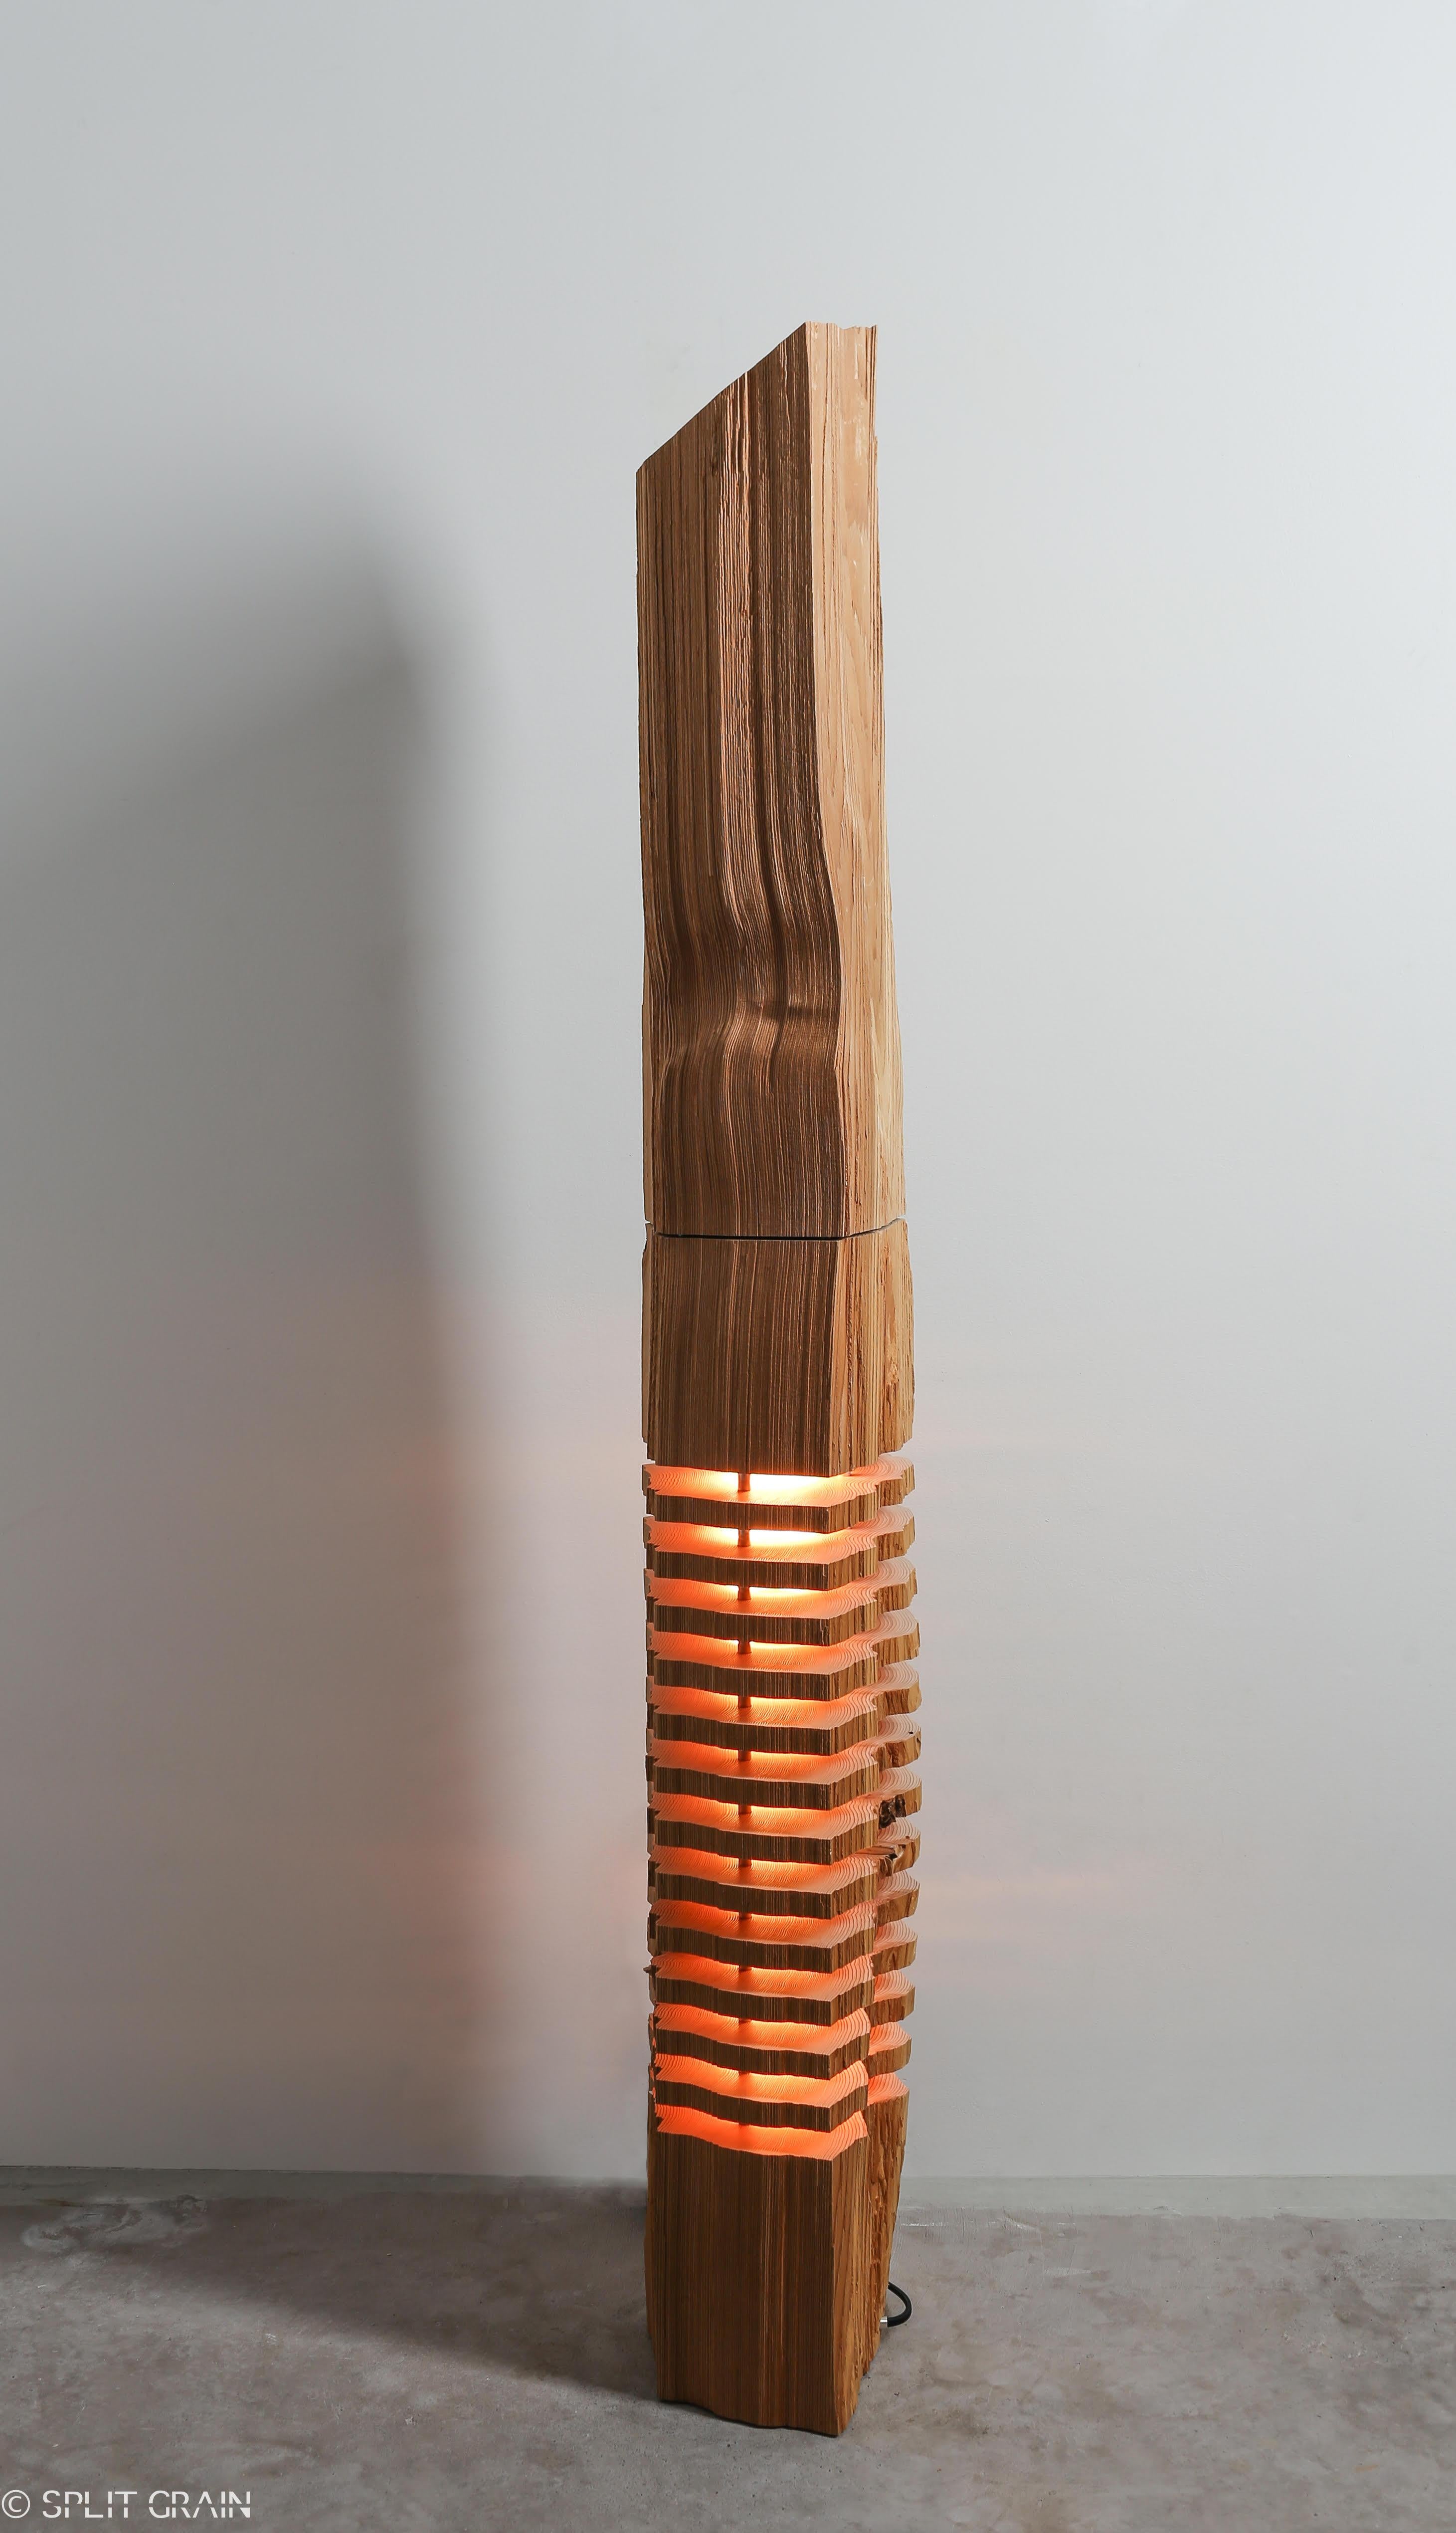 Large split grain cedar wood illuminated sculpture. Handcrafted by 20th century artist Paul Foeckler, this one of a kind illuminated sculpture reveals the elemental form and grain in a piece of reclaimed California Incense Cedar. Fascinating details